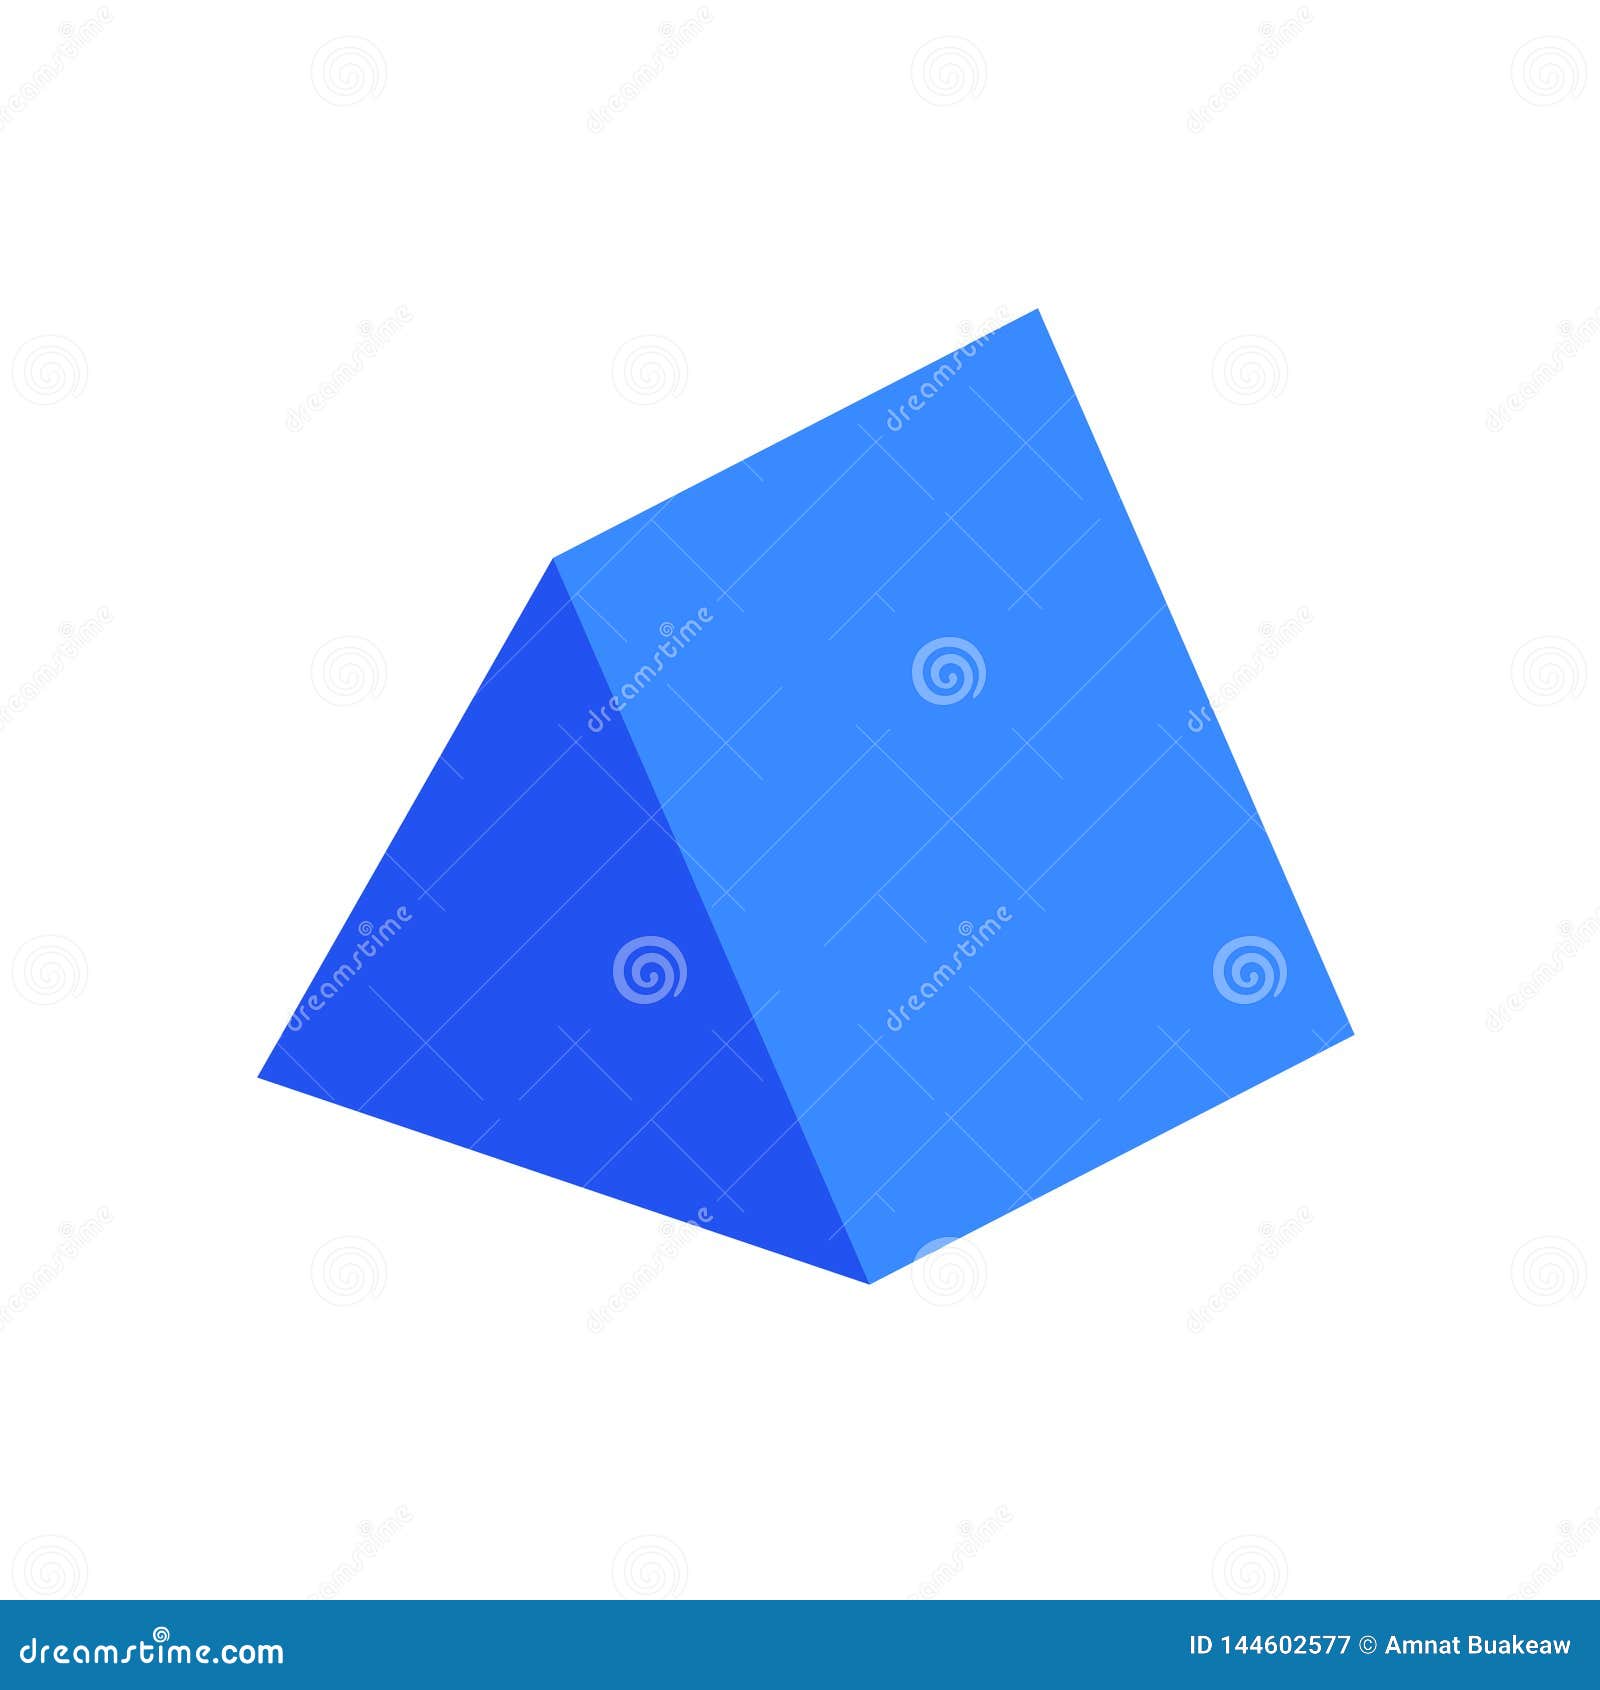 https://thumbs.dreamstime.com/z/blue-triangular-prism-basic-simple-d-shape-isolated-white-background-geometric-icon-symbol-clip-art-kids-learning-144602577.jpg